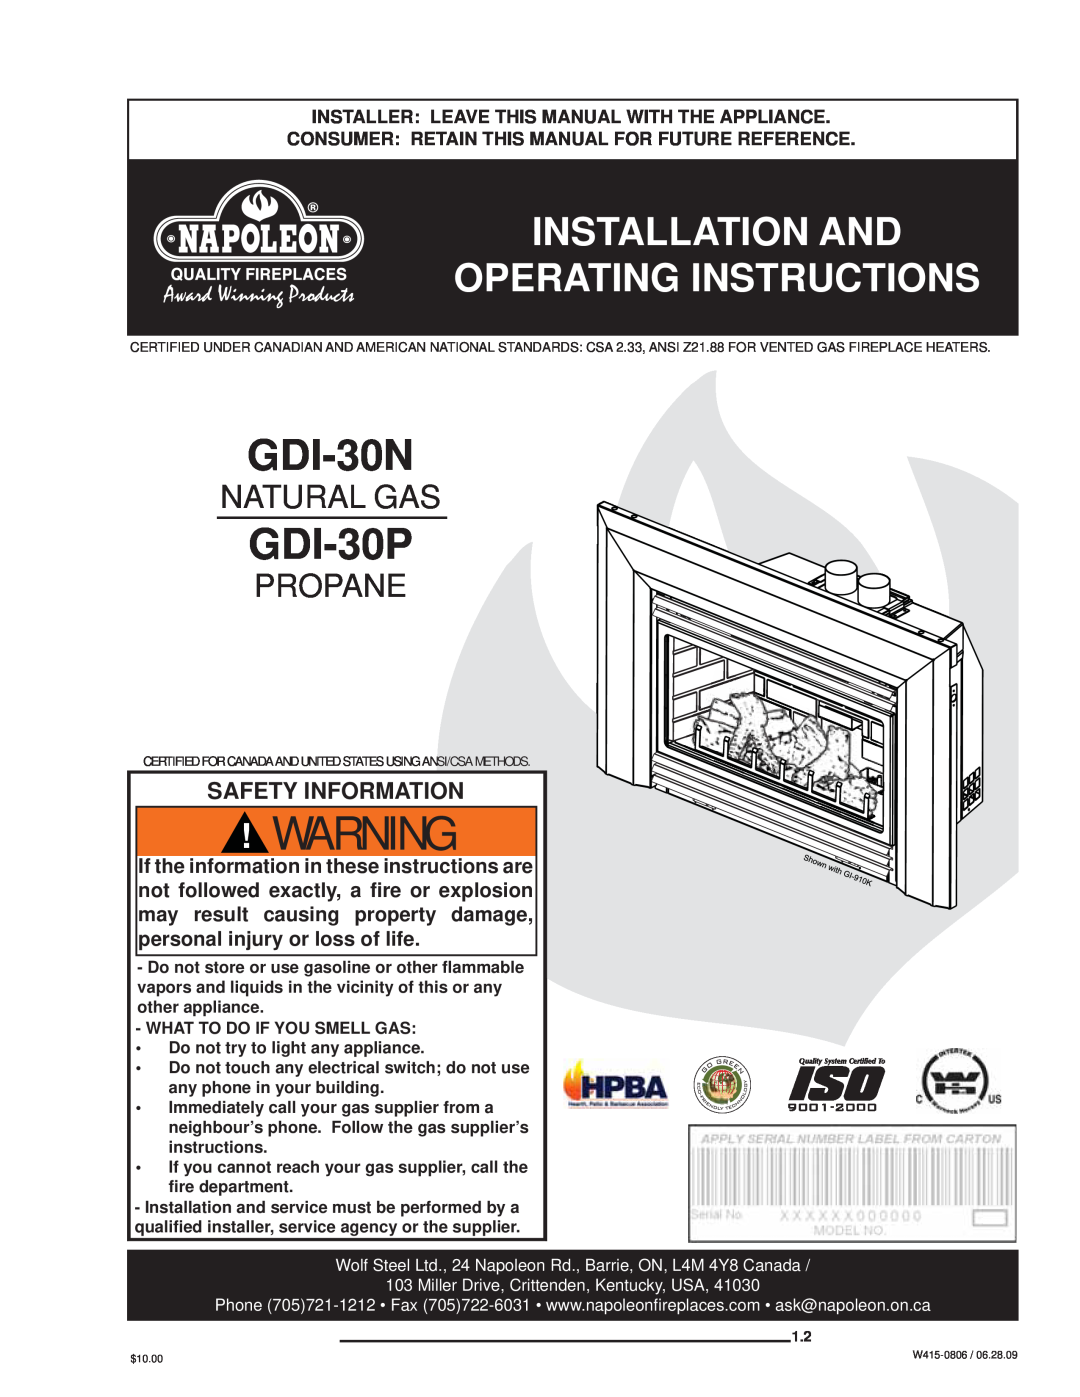 Napoleon Fireplaces GDI30 manual Natural Gas, Propane, Installer: Leave This Manual With The Appliance, GDI-30N, GDI-30P 